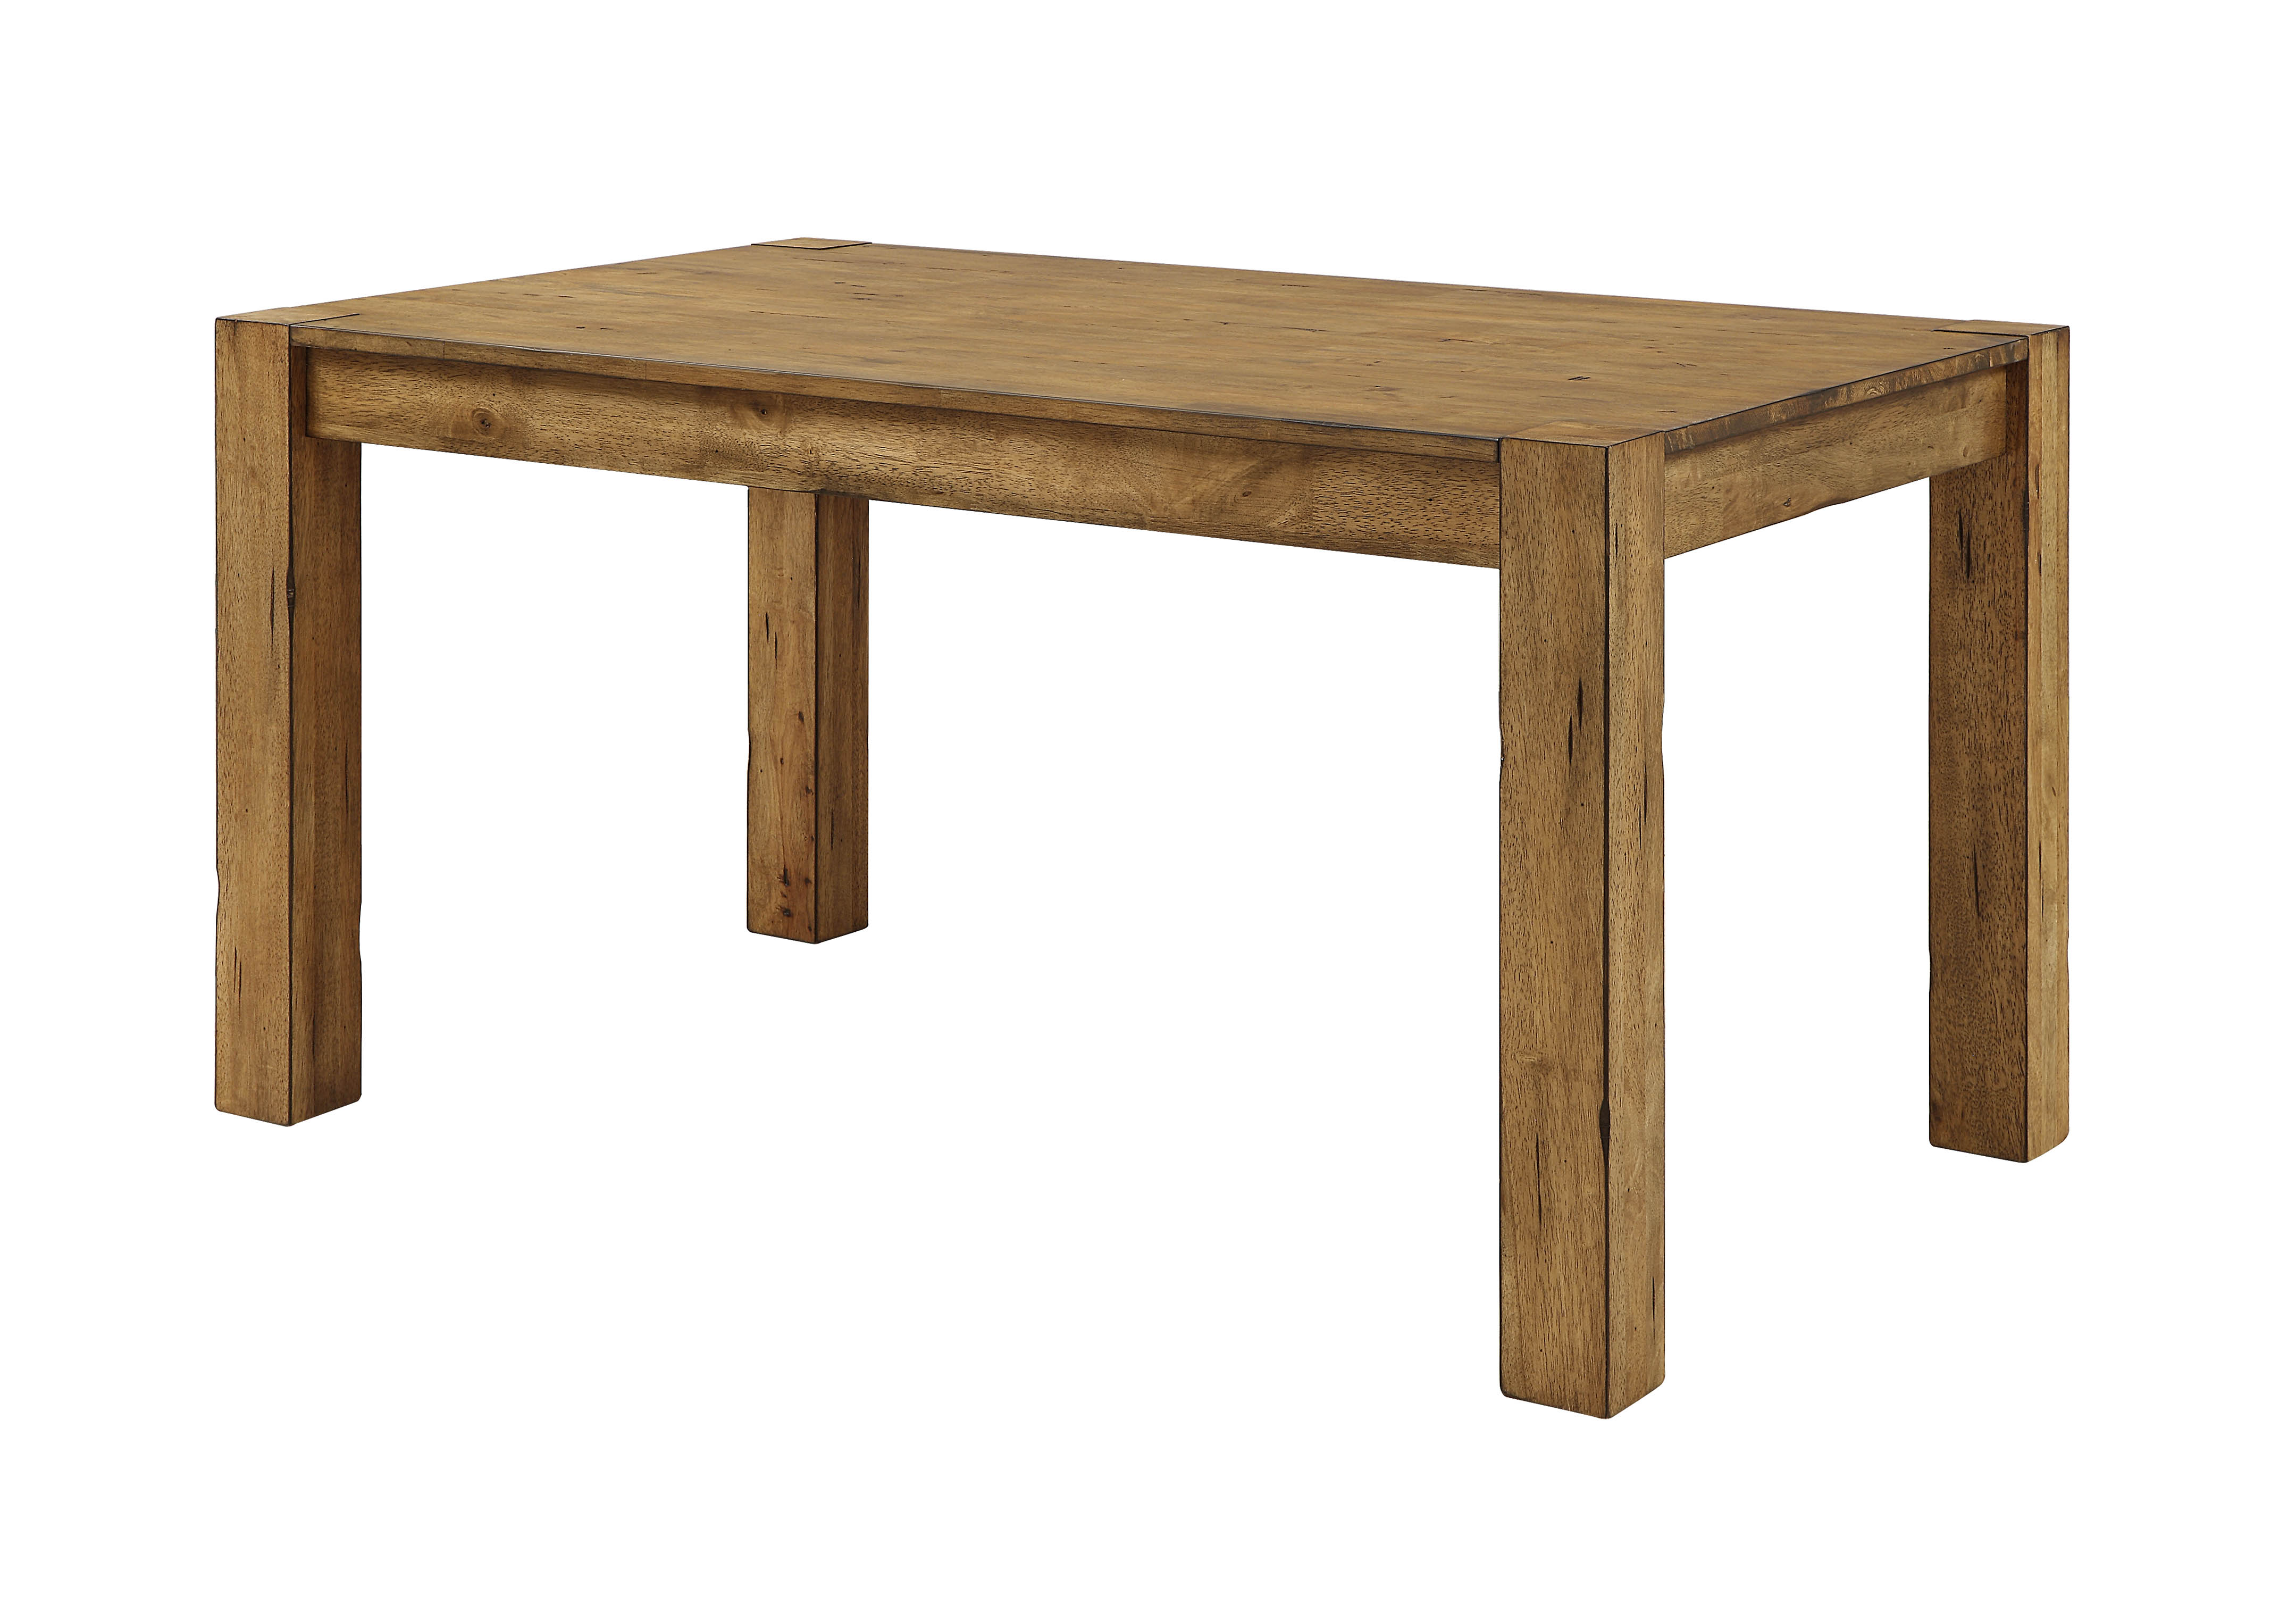 Better Homes & Gardens Bryant Solid Wood Dining Table, Rustic Brown - image 12 of 14